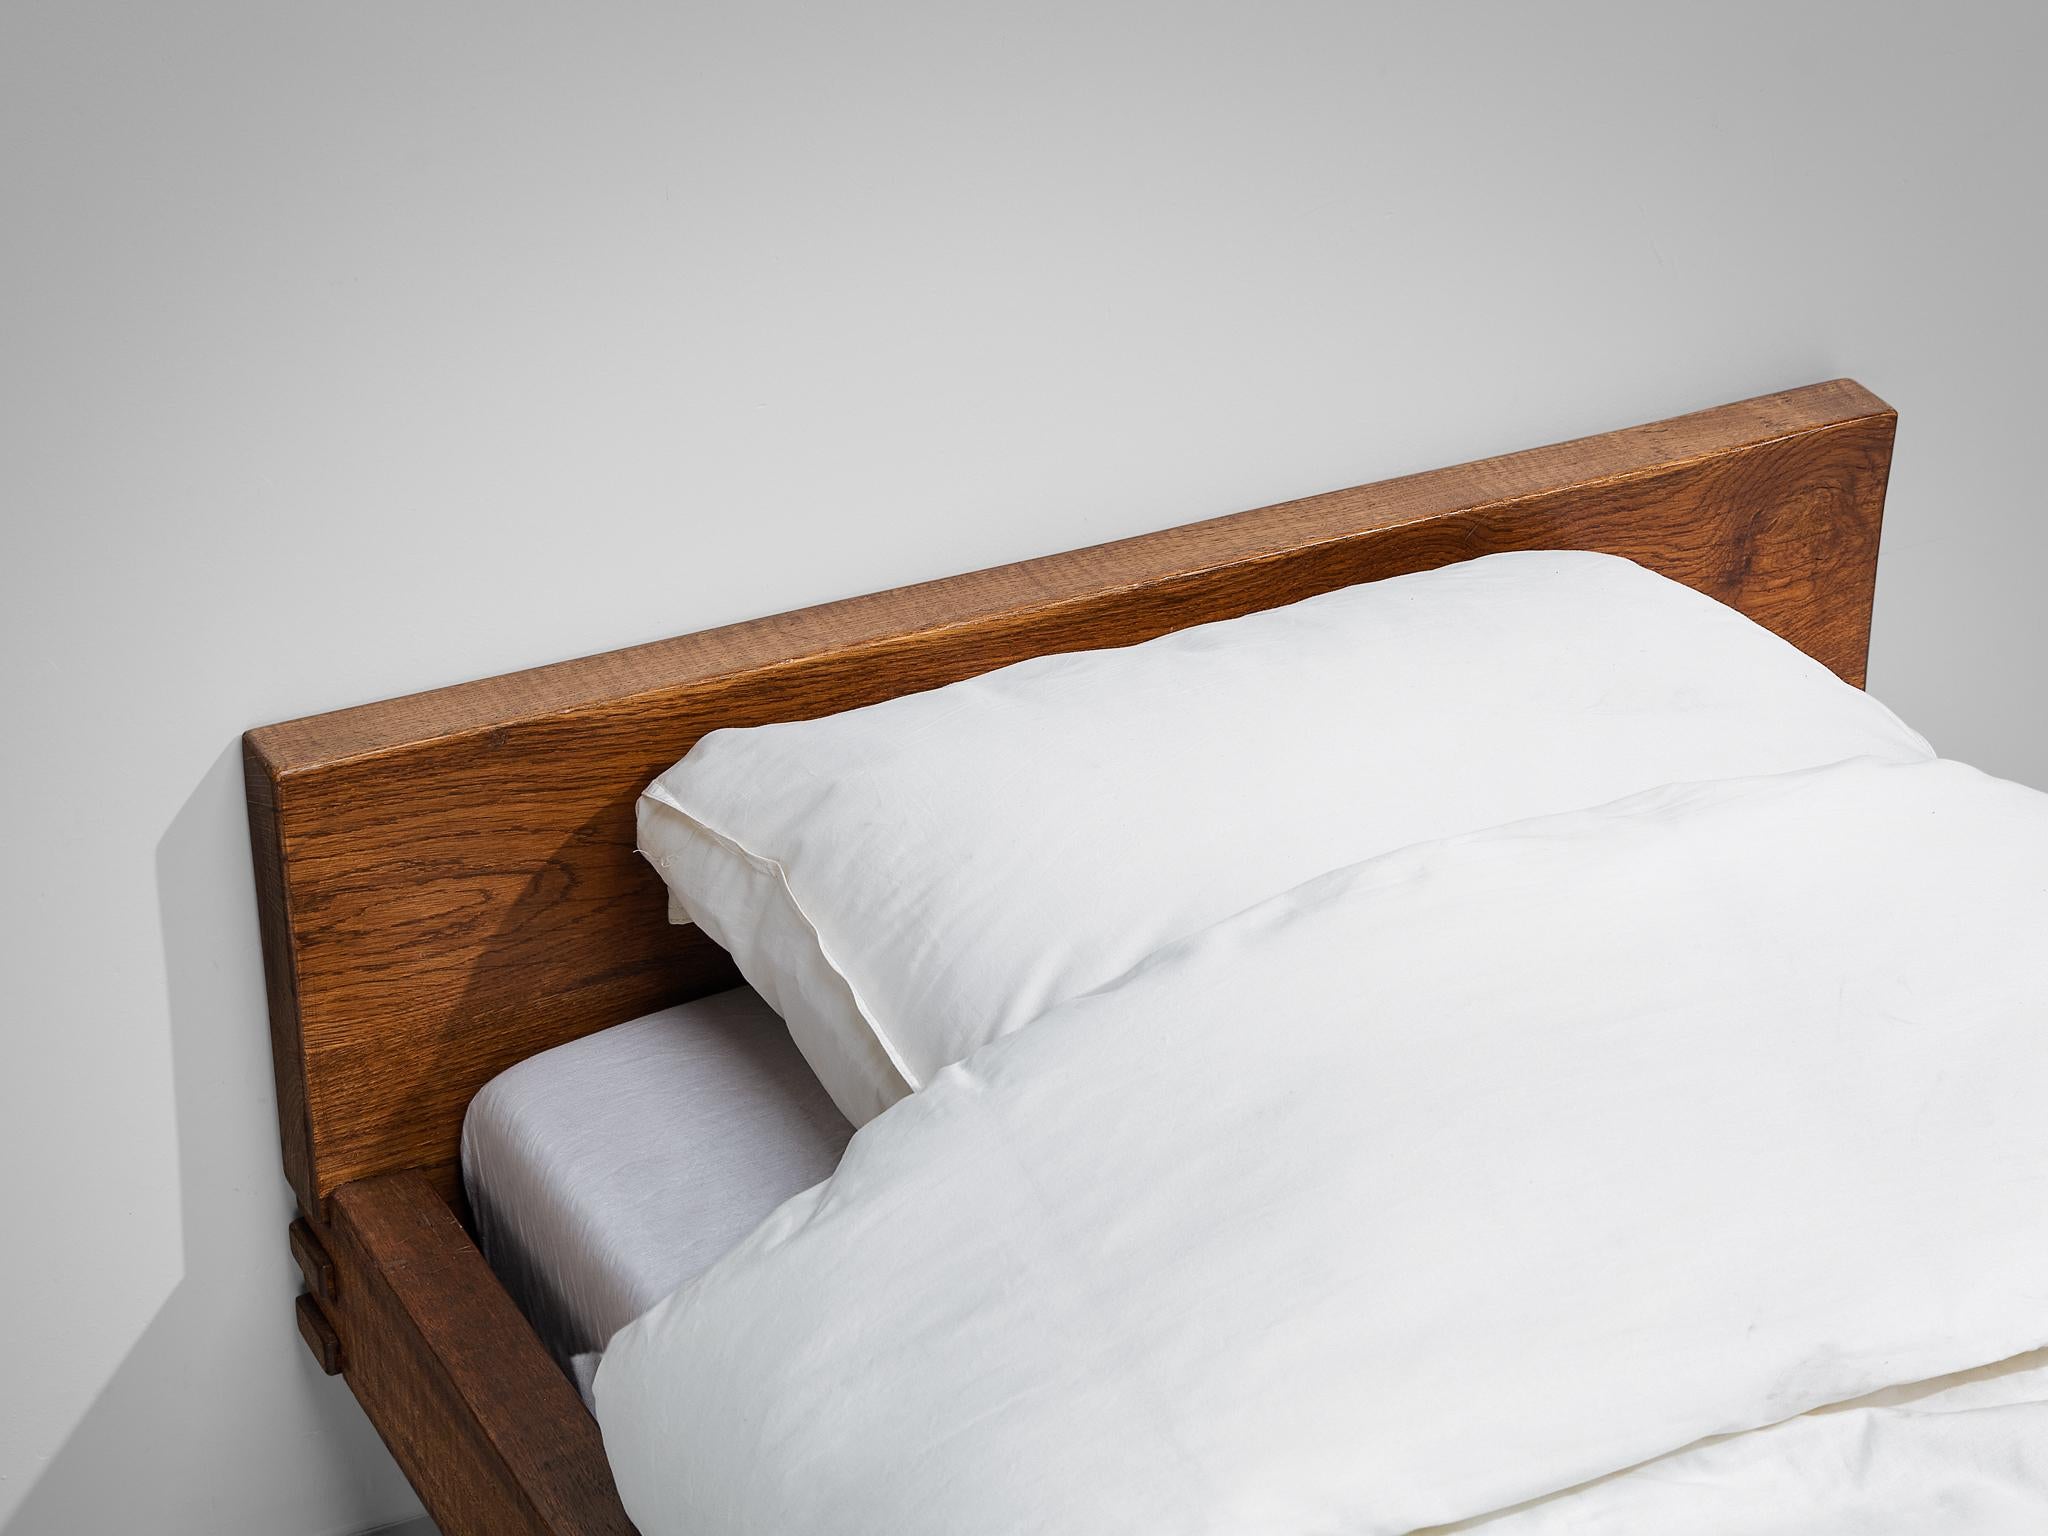 Late 20th Century Giuseppe Rivadossi for Officina Rivadossi Single Bed in Walnut  For Sale